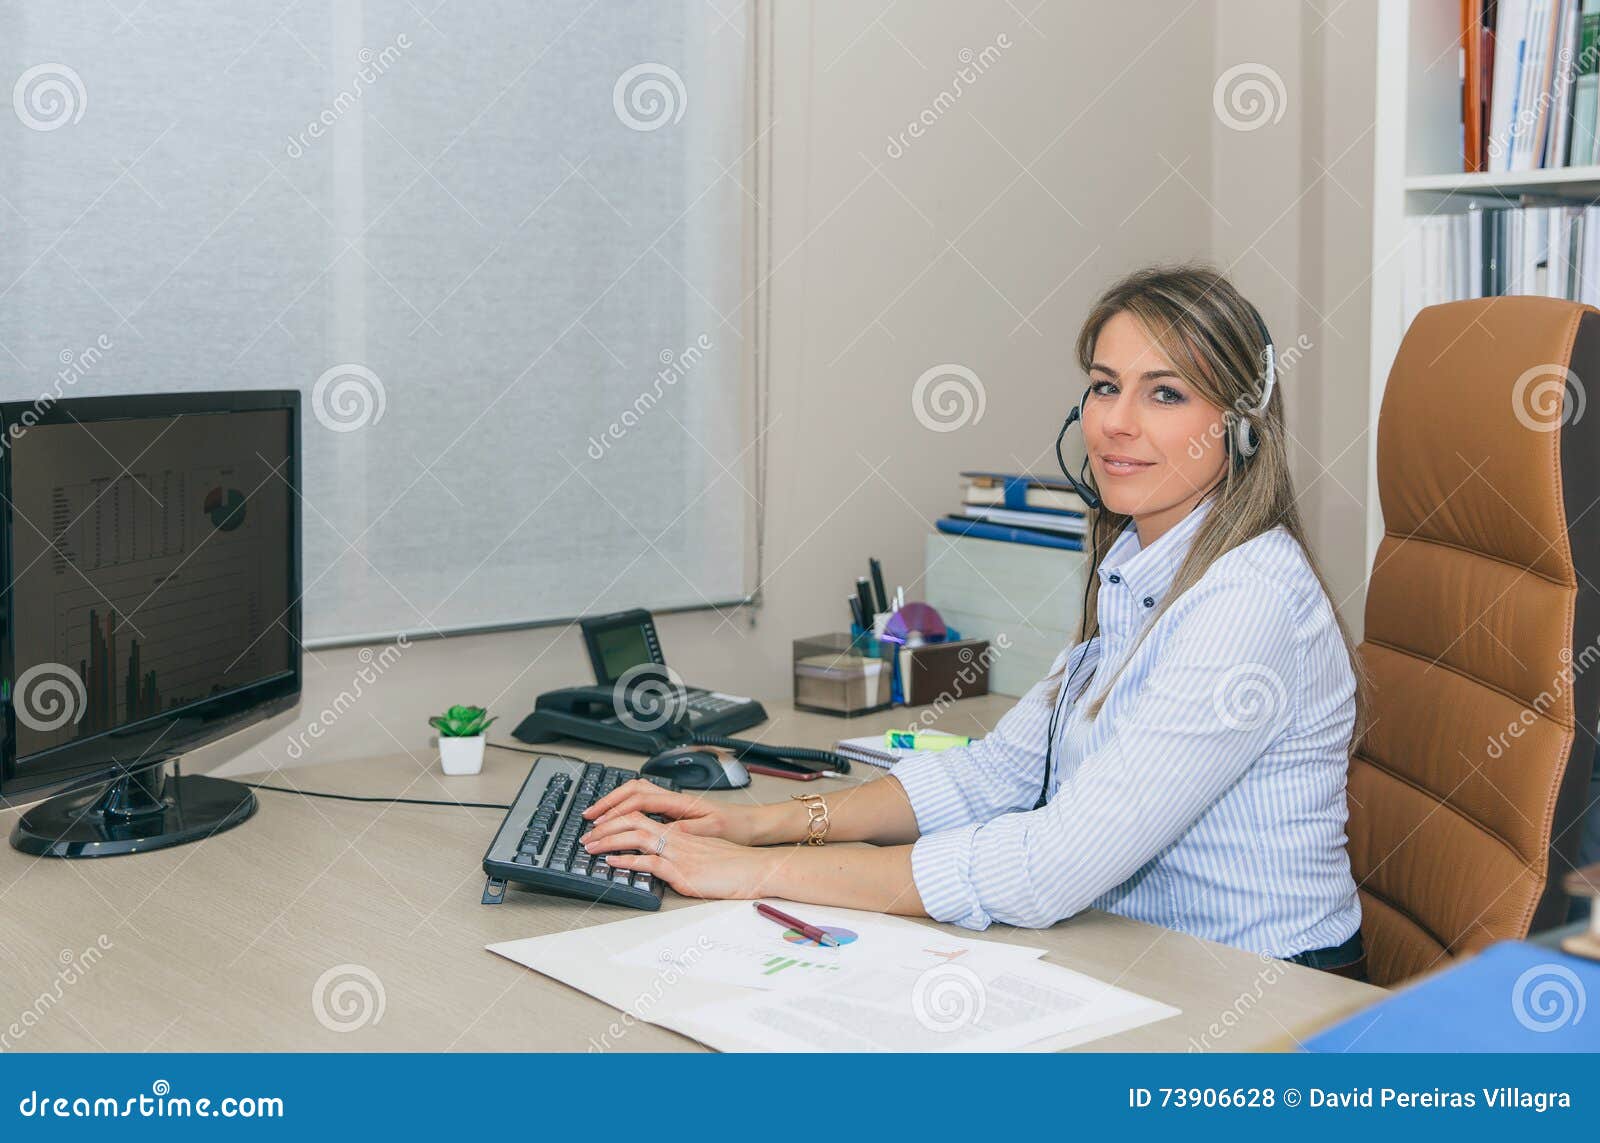 smiling blonde secretary working with computer in office